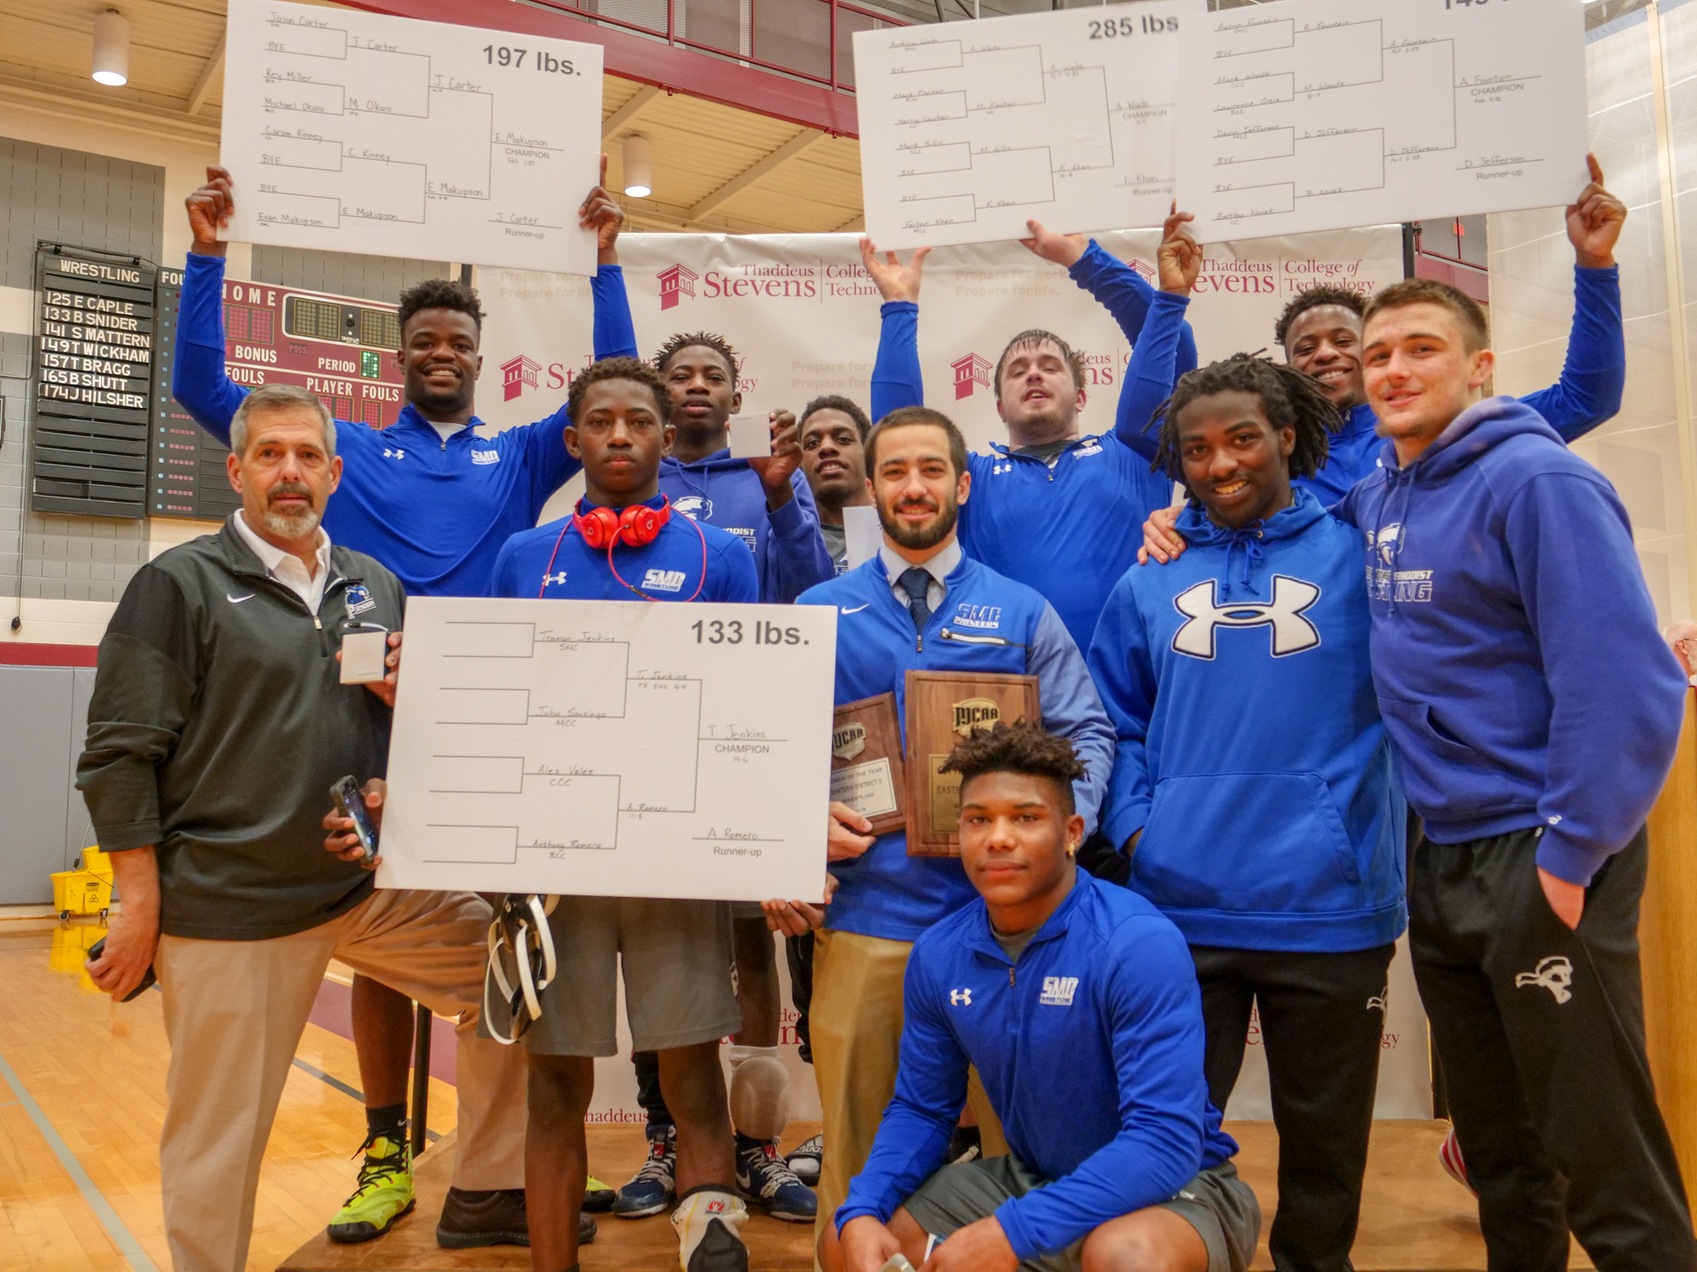 Wrestling Wins Eastern District II Tournament, Crowns 5 Champions & Coach of the Year